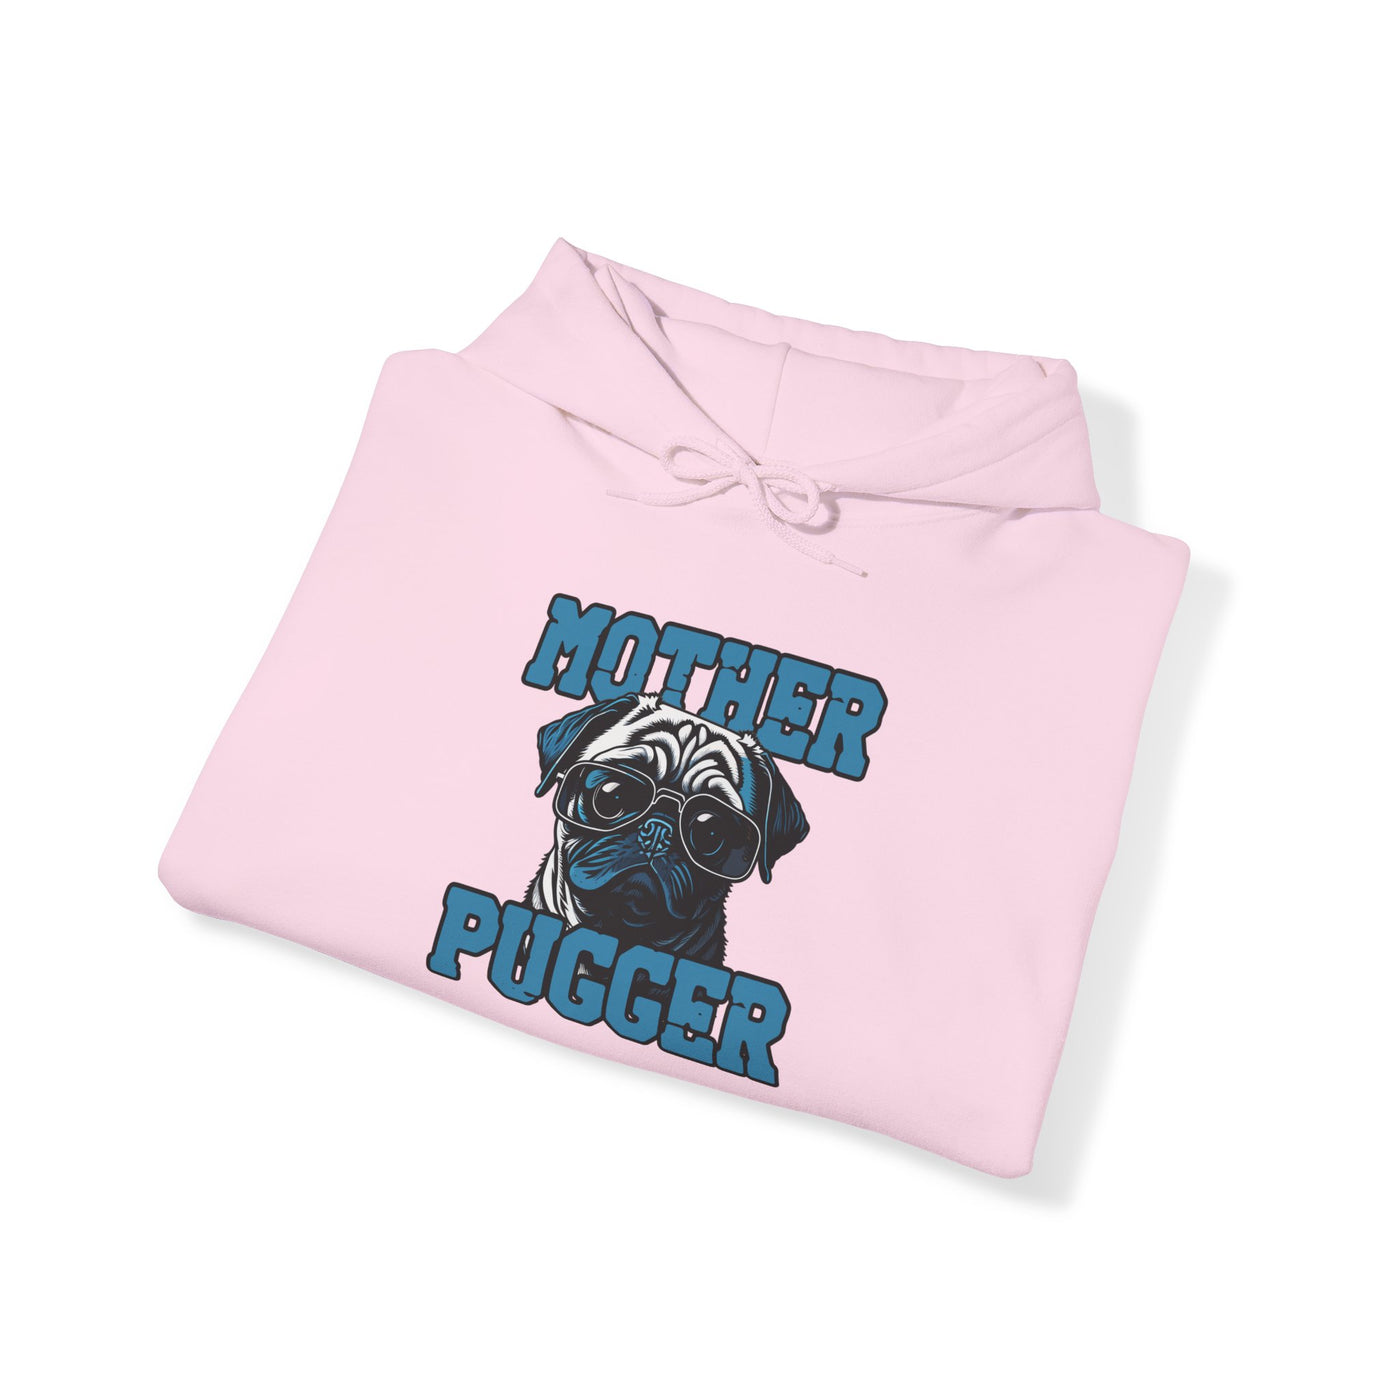 Mother Pugger Colored Print Hoodie